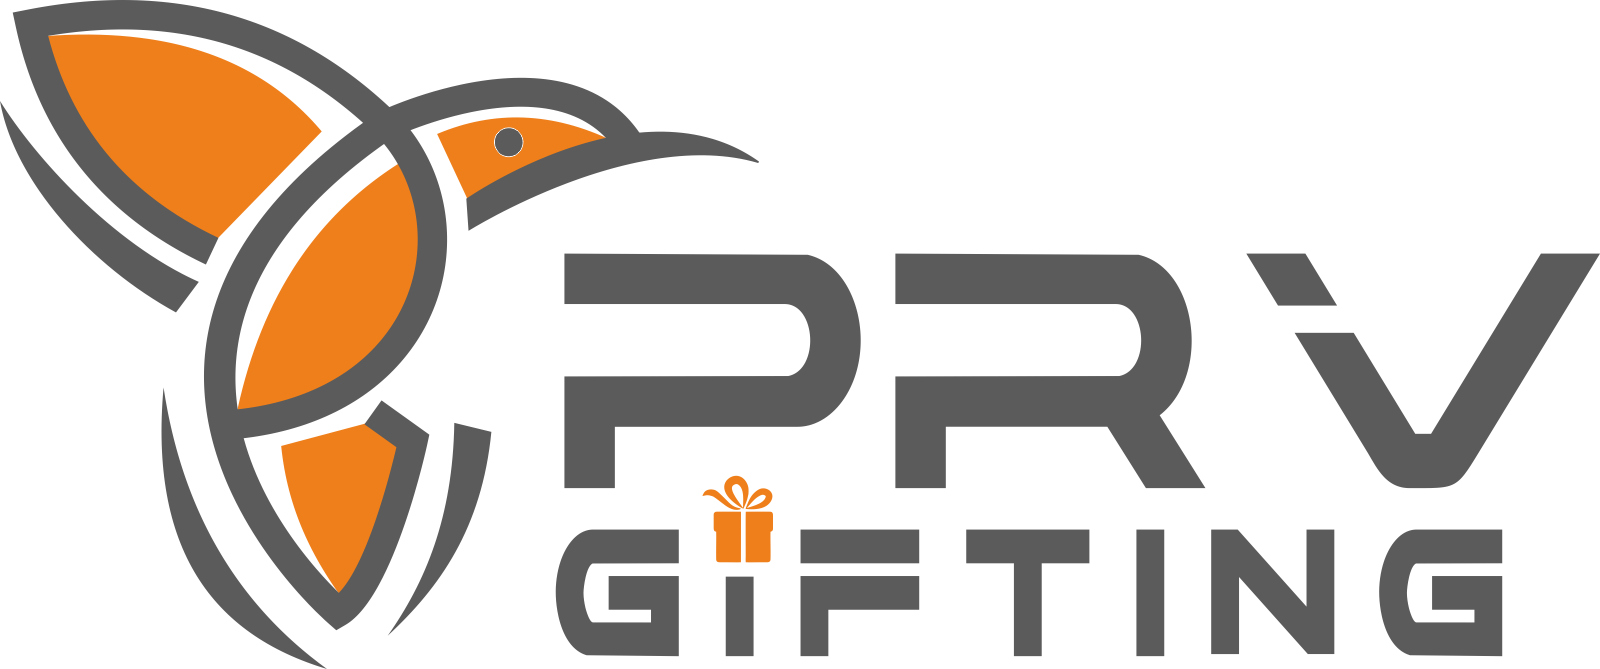 cropped-prvgifting.png